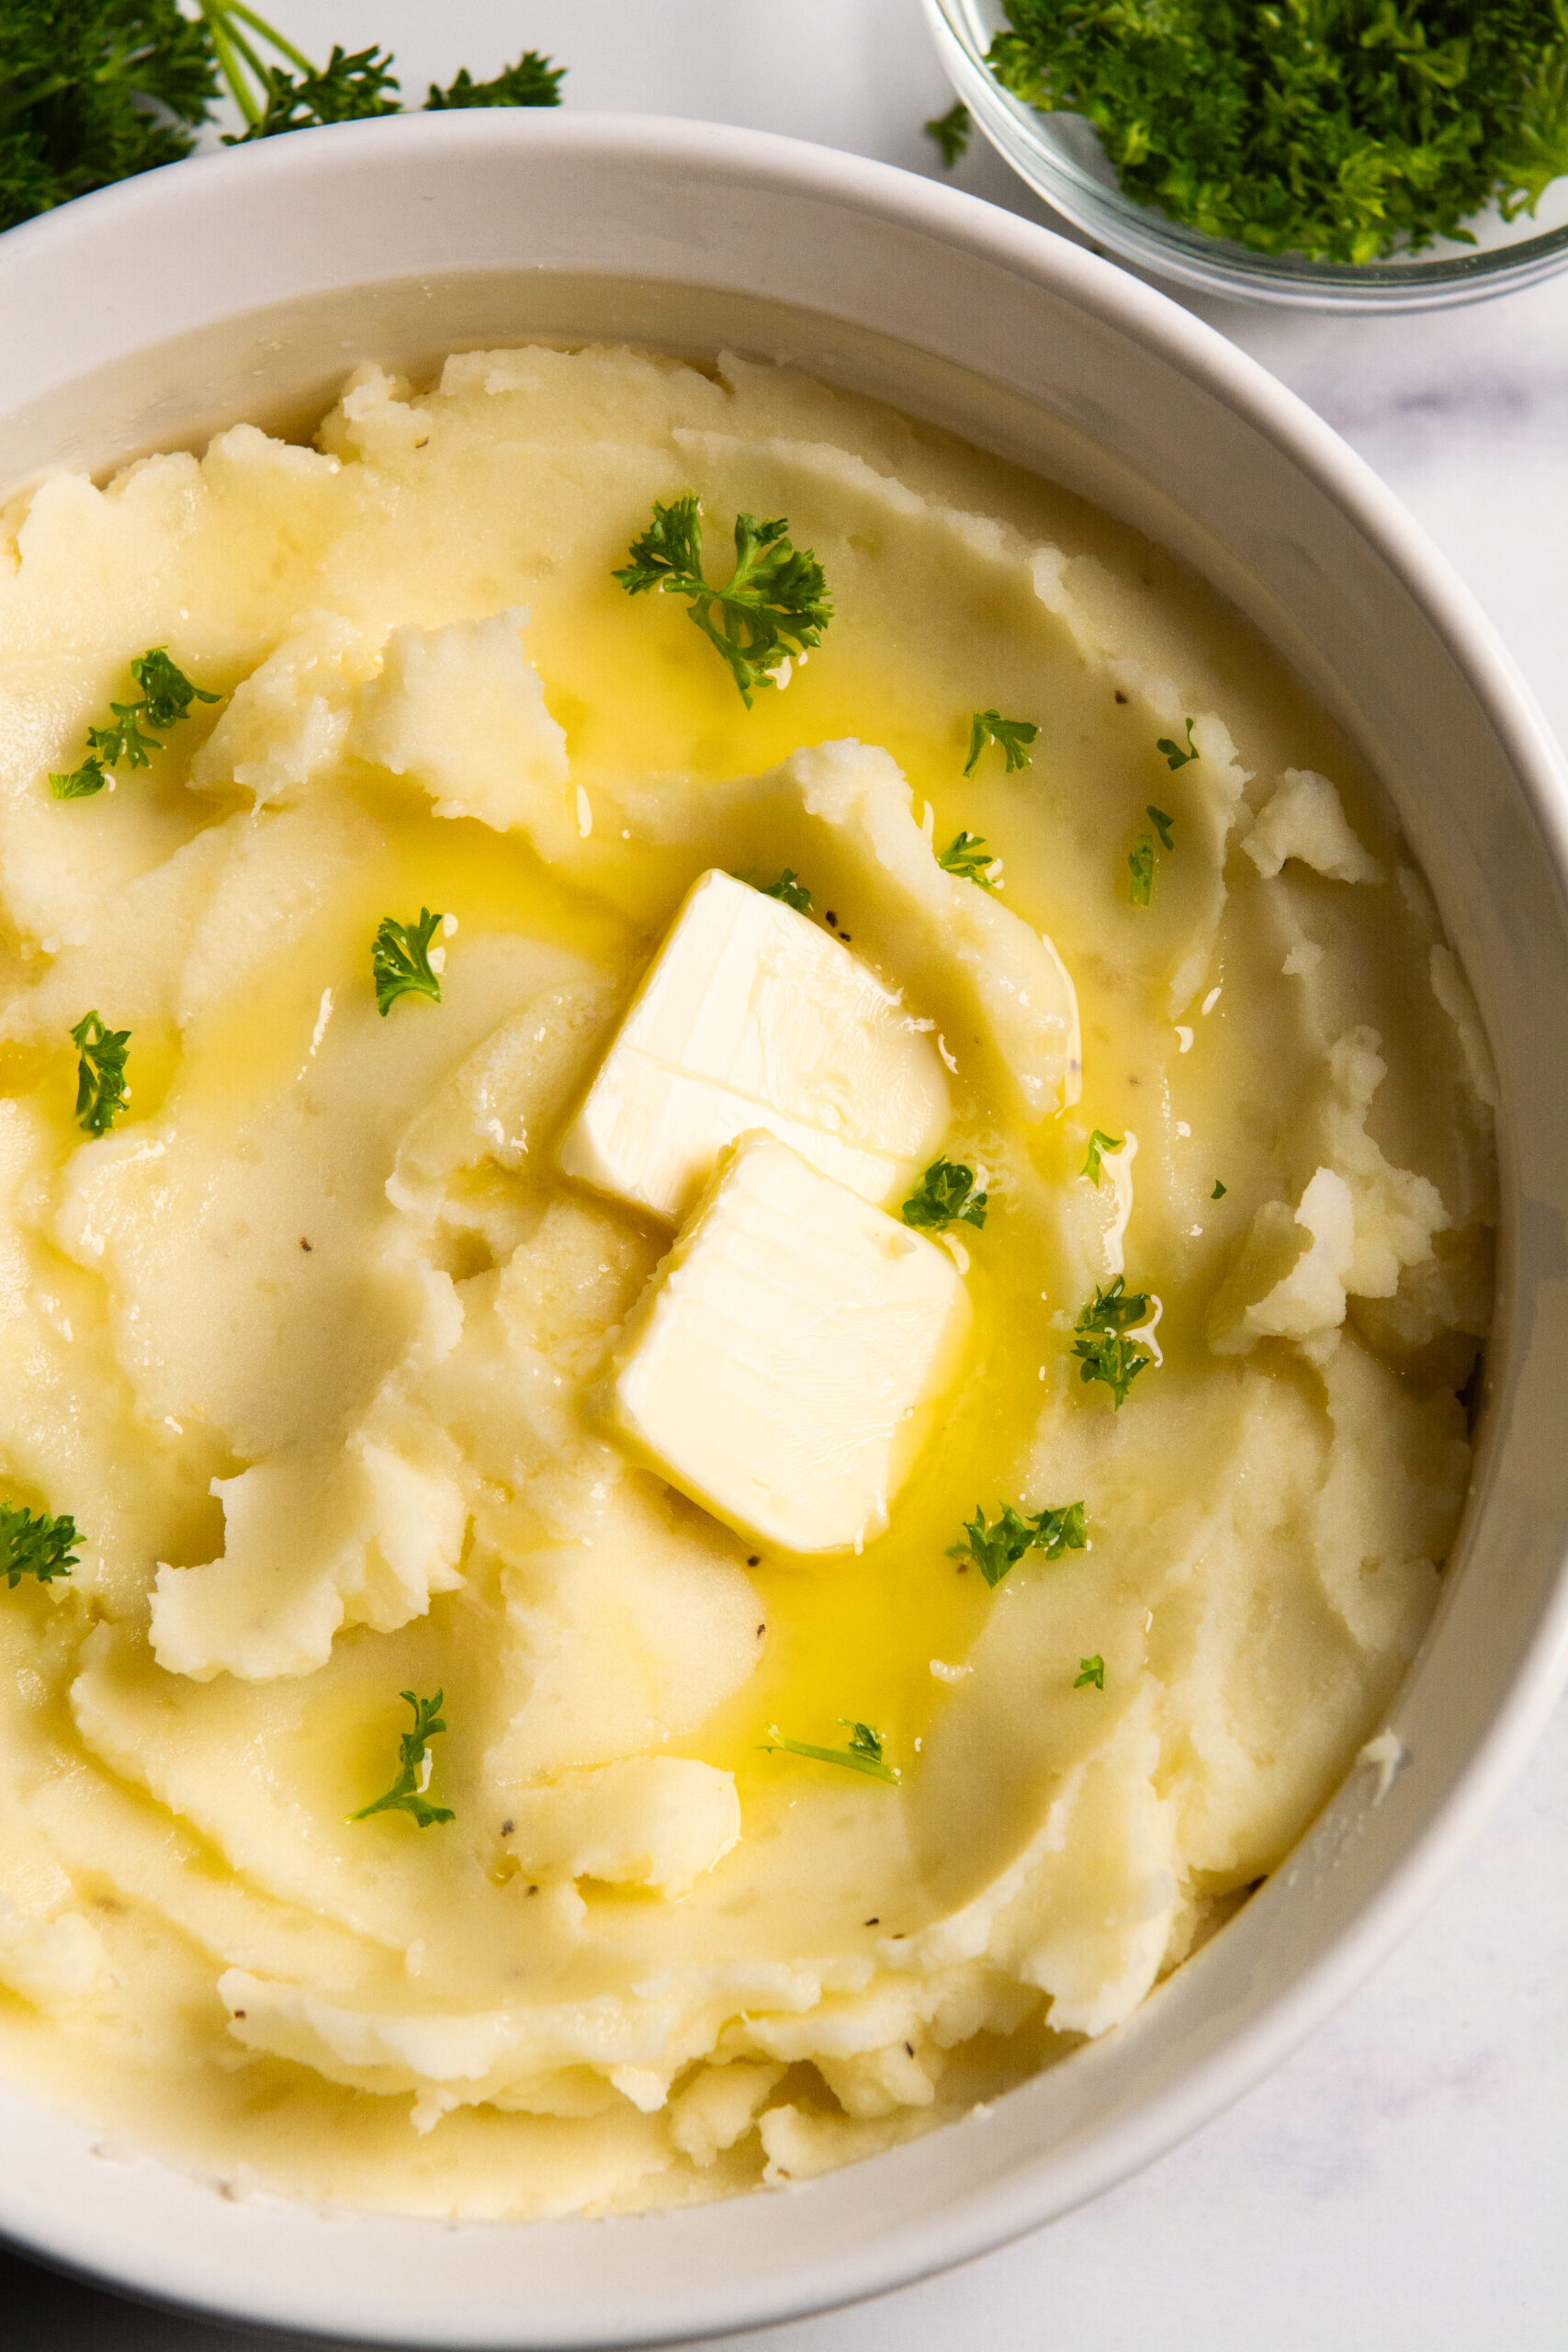 A bowl of mashed potatoes with two tablespoons of butter, drizzled with more melted butter and sprinkled with parsley.